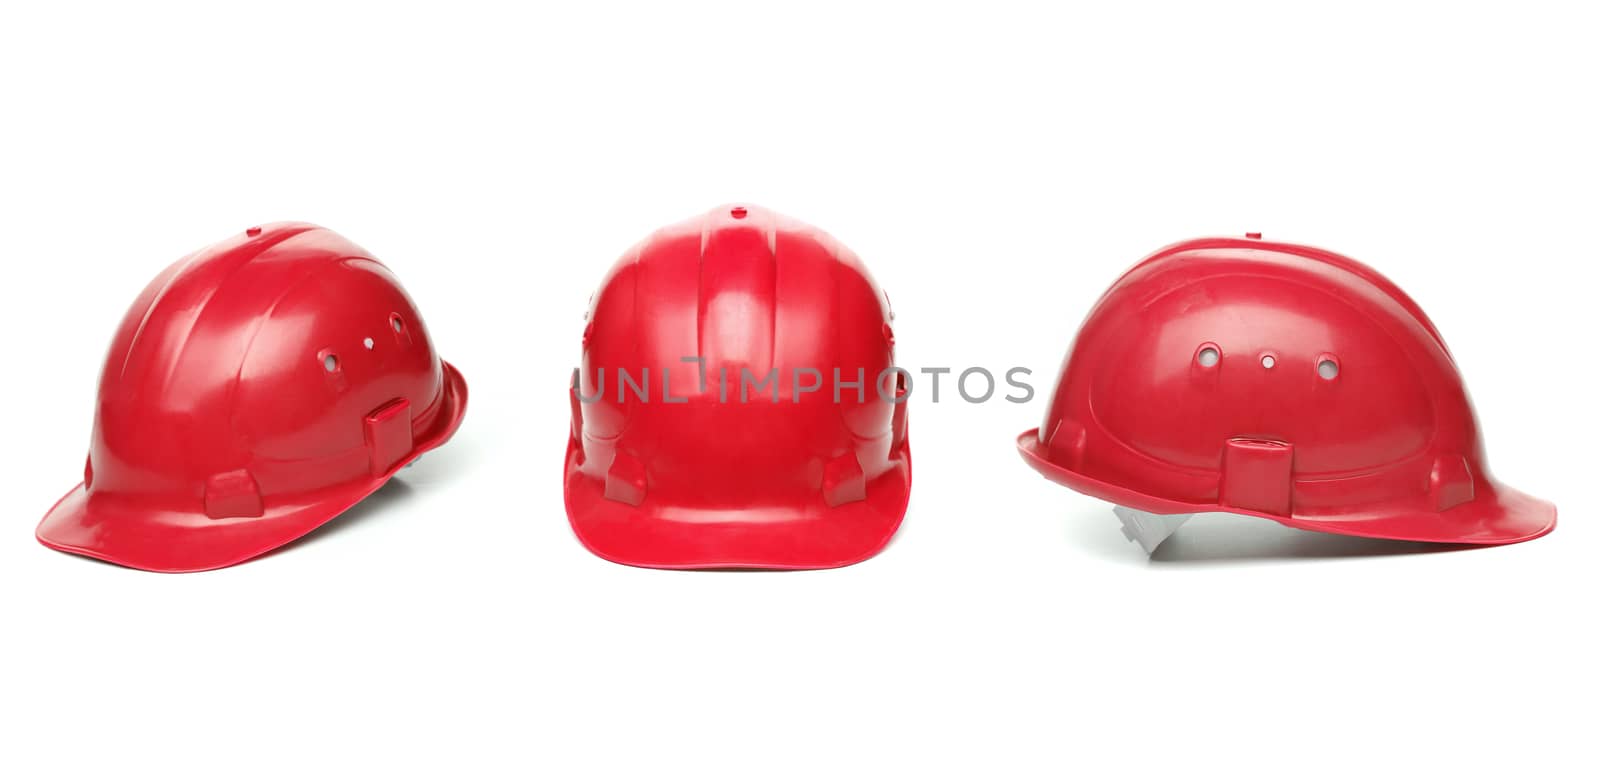 Three identical red hard hat. by indigolotos